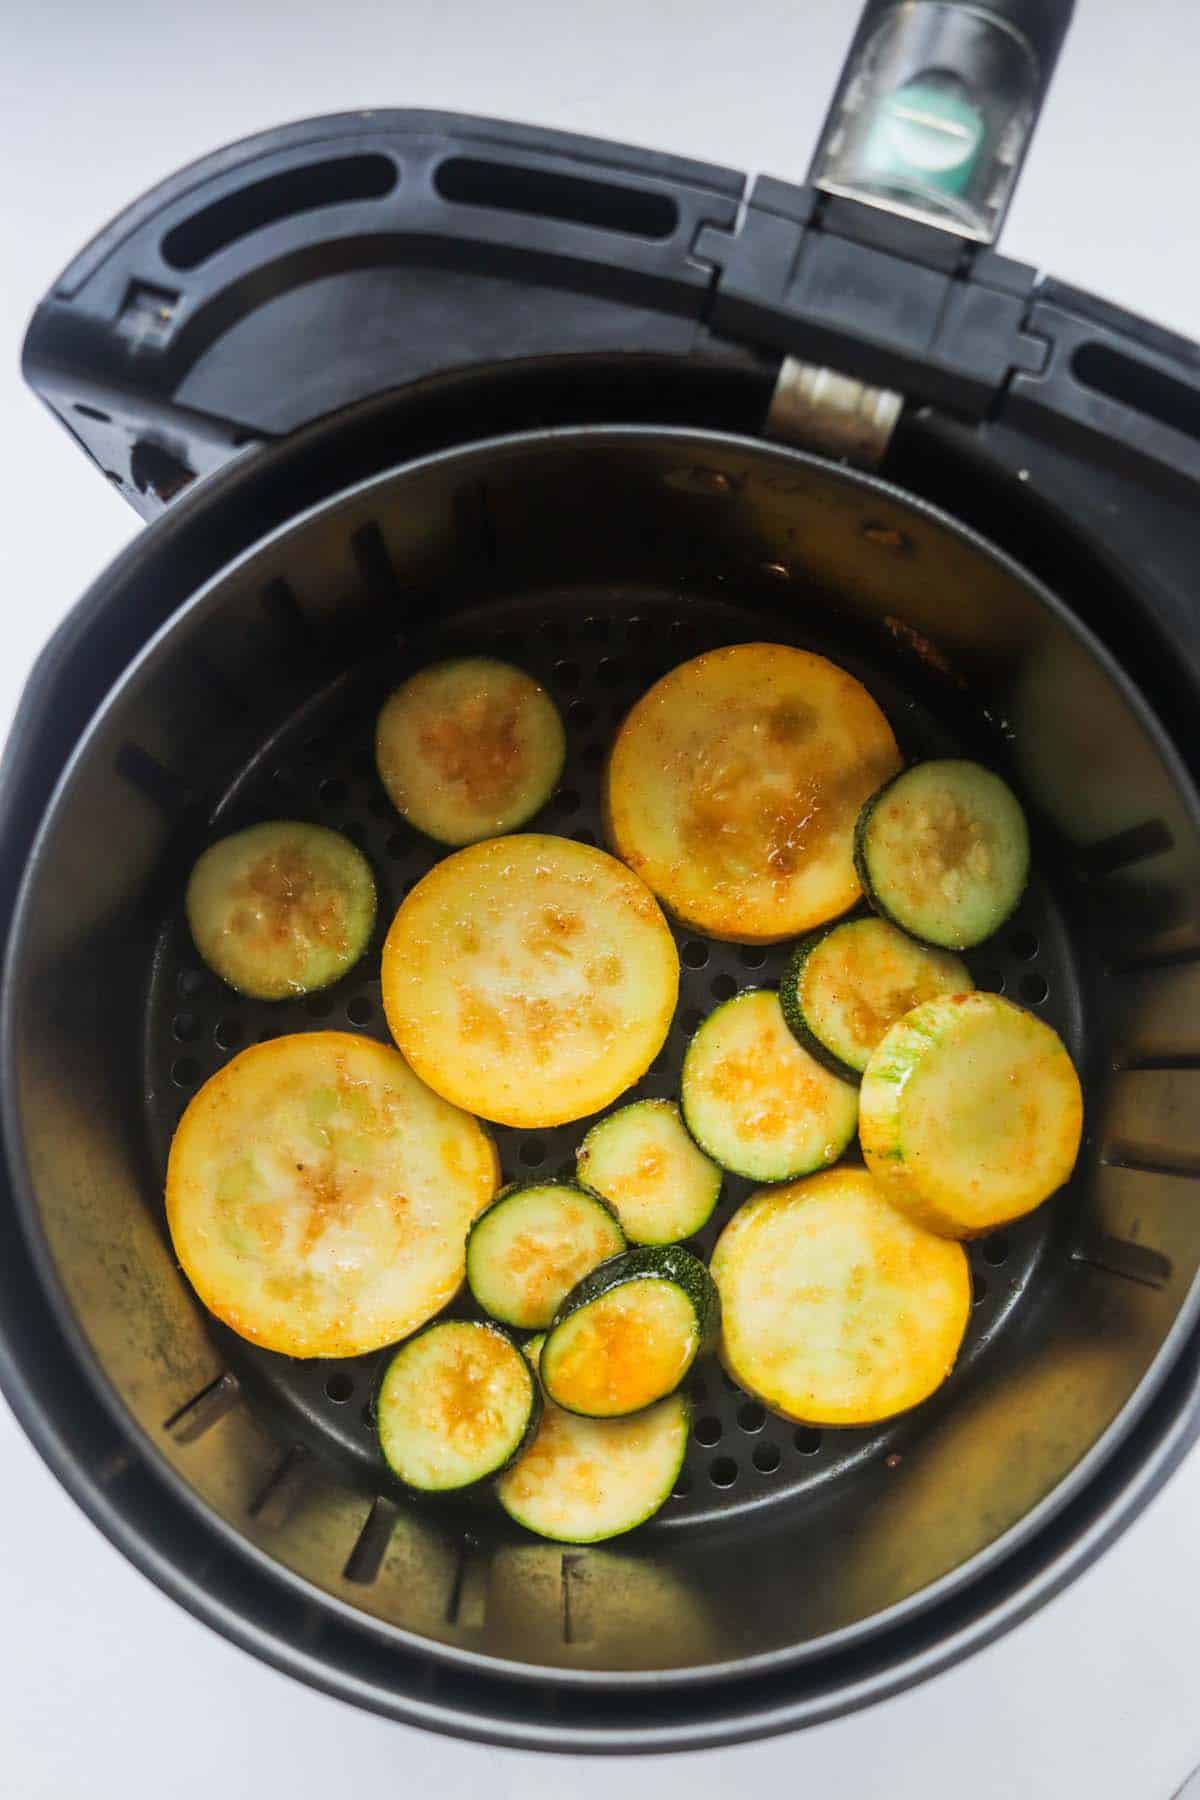 Uncooked slices of squash in the air fryer basket.